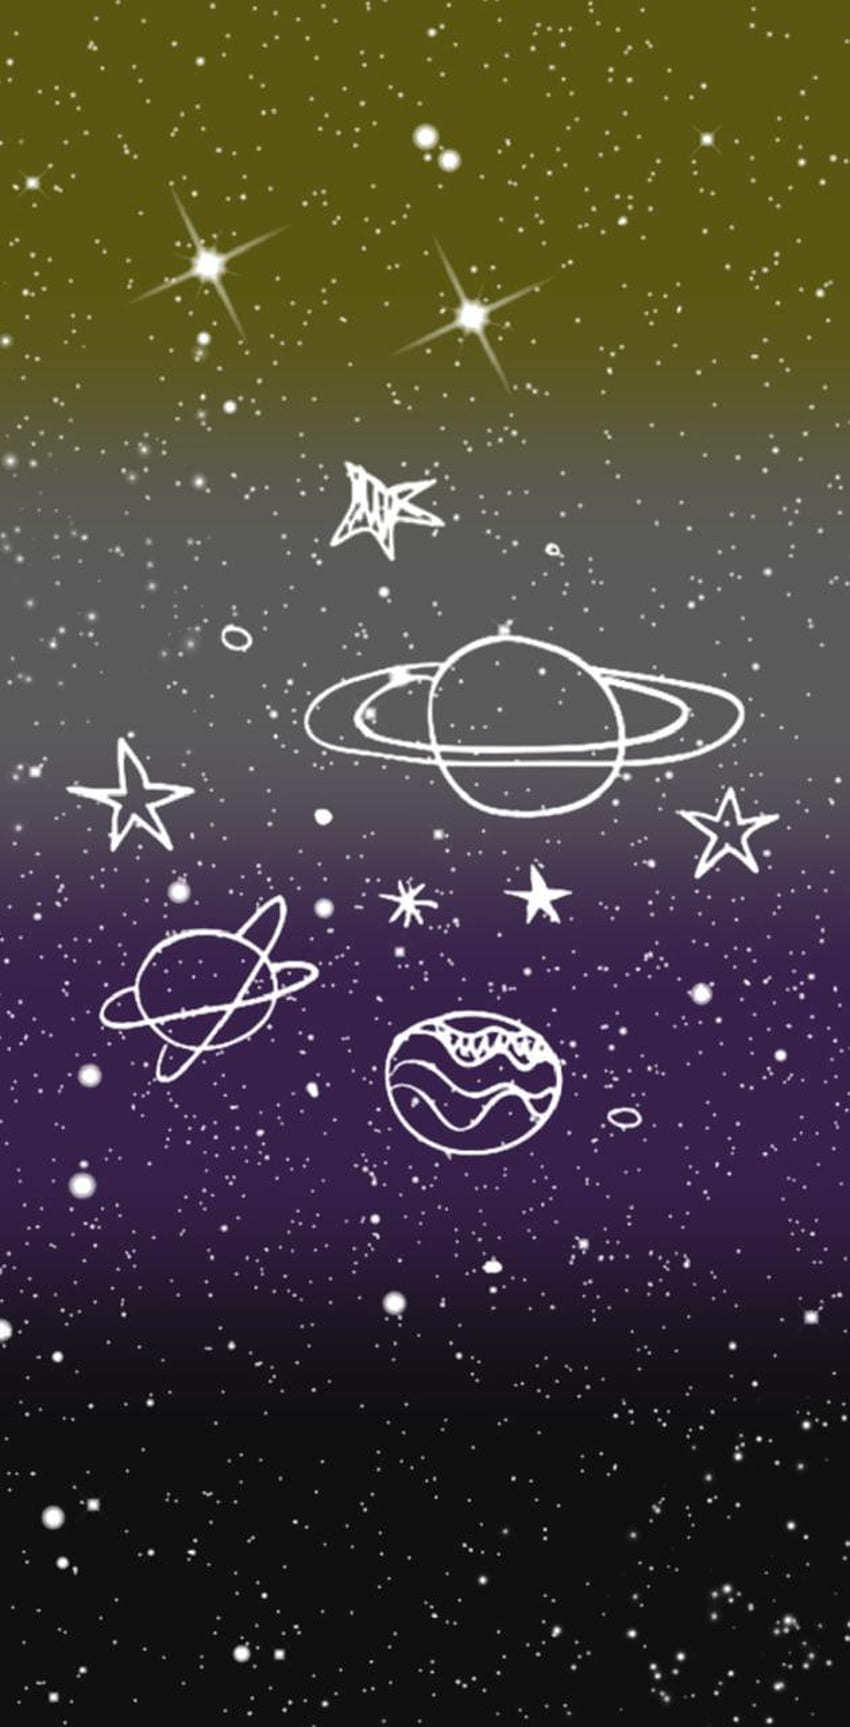 A purple and black background with stars, planets - Non binary